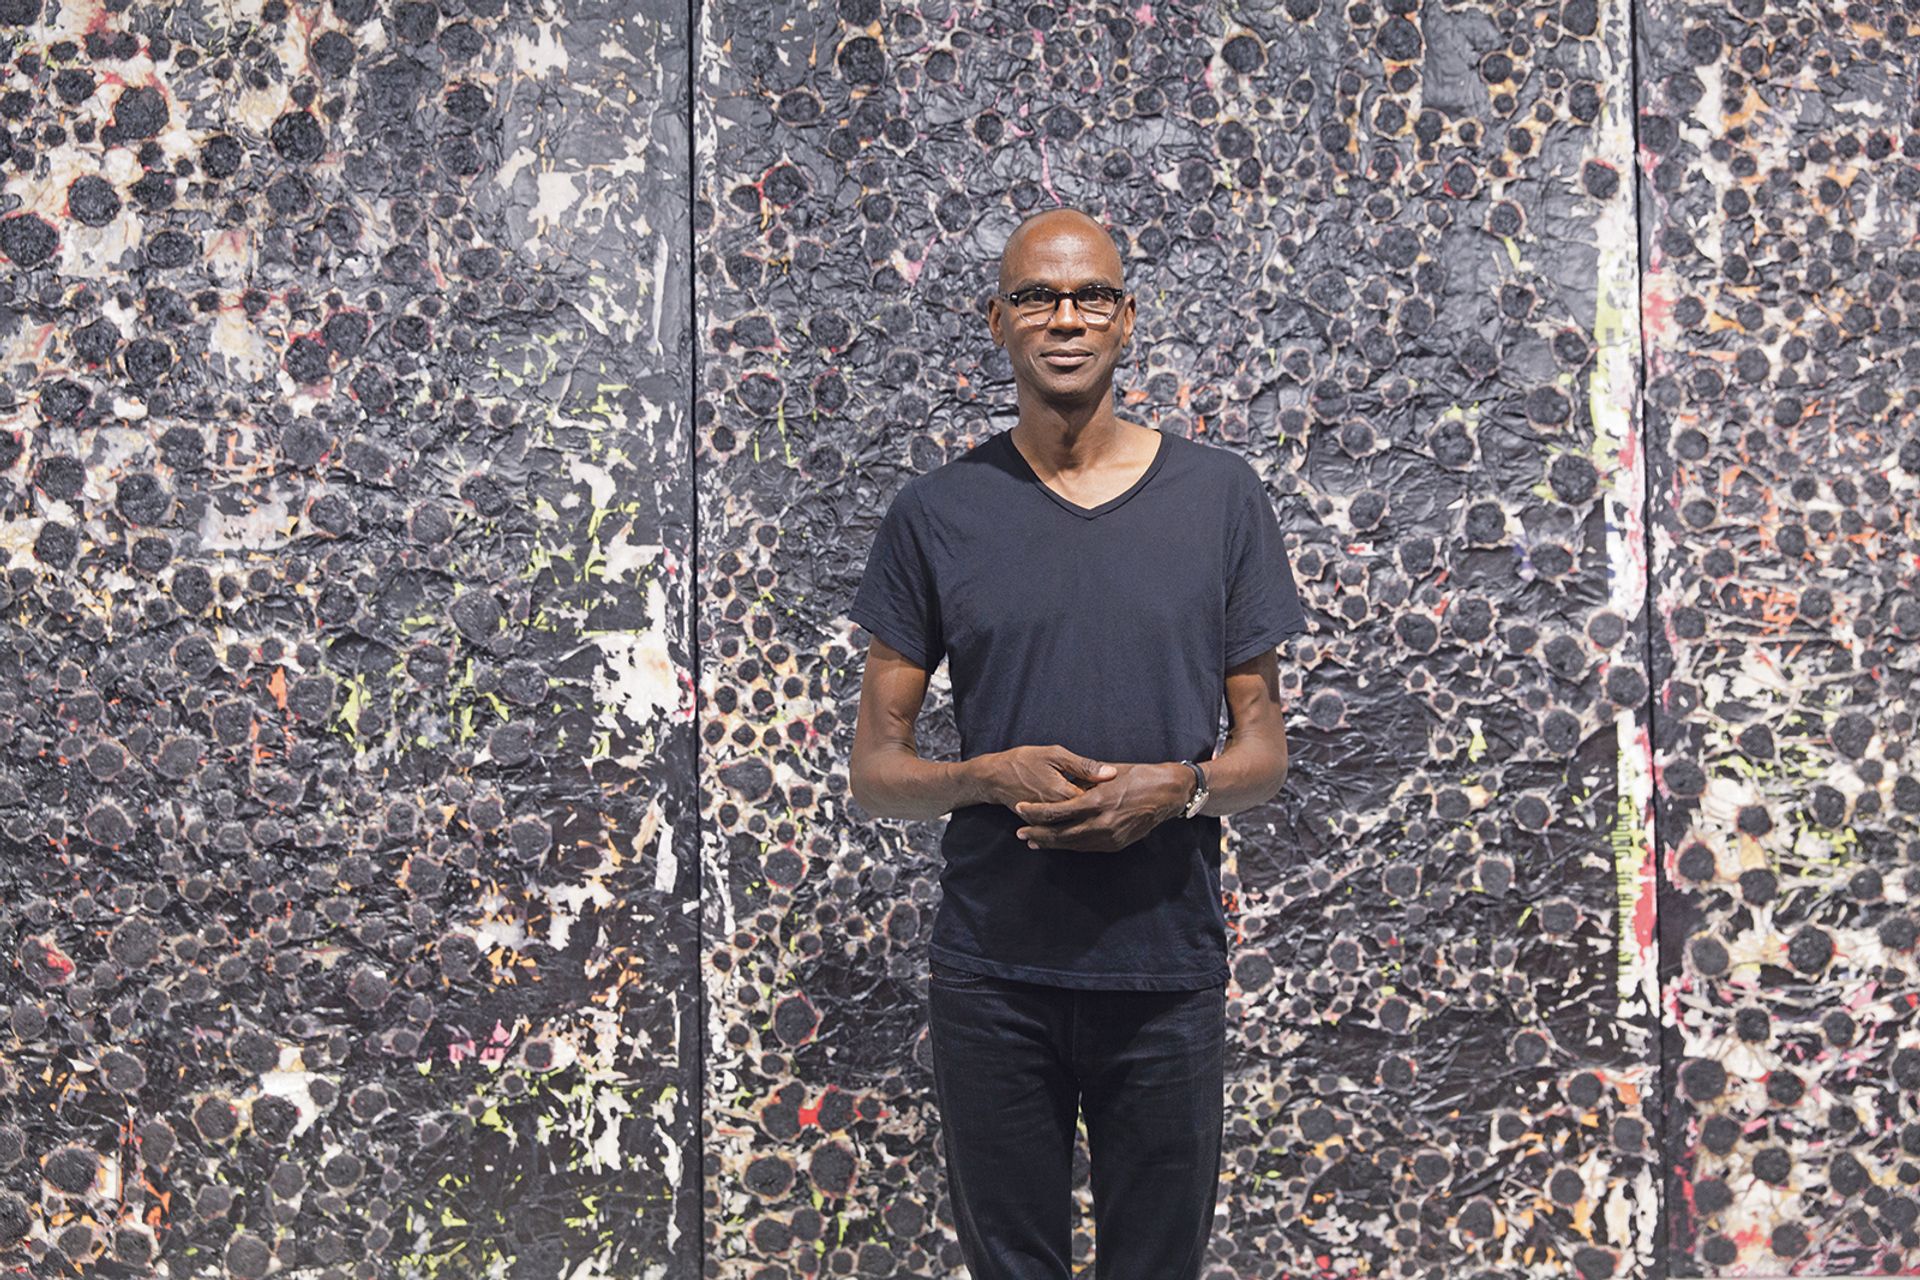 The Los Angeles artist Mark Bradford in front of his work at Hauser & Wirth's stand at Art Basel in Miami Beach Photo: © Vanessa Ruiz